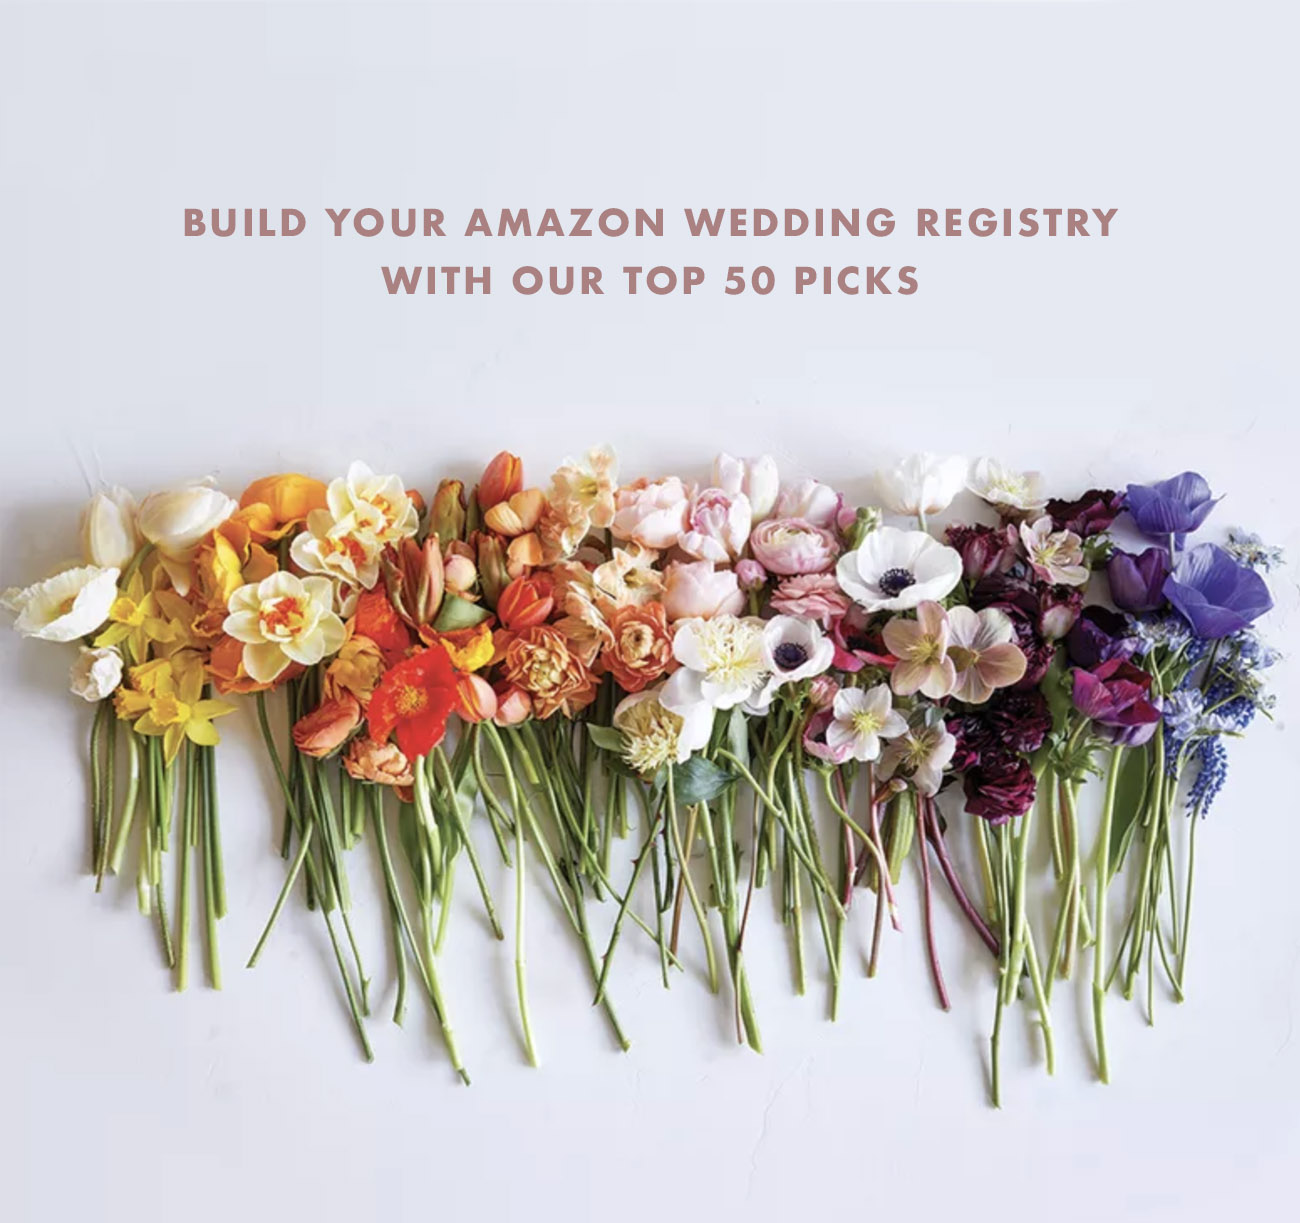 Our Top 50 Picks for your Amazon Wedding Registry